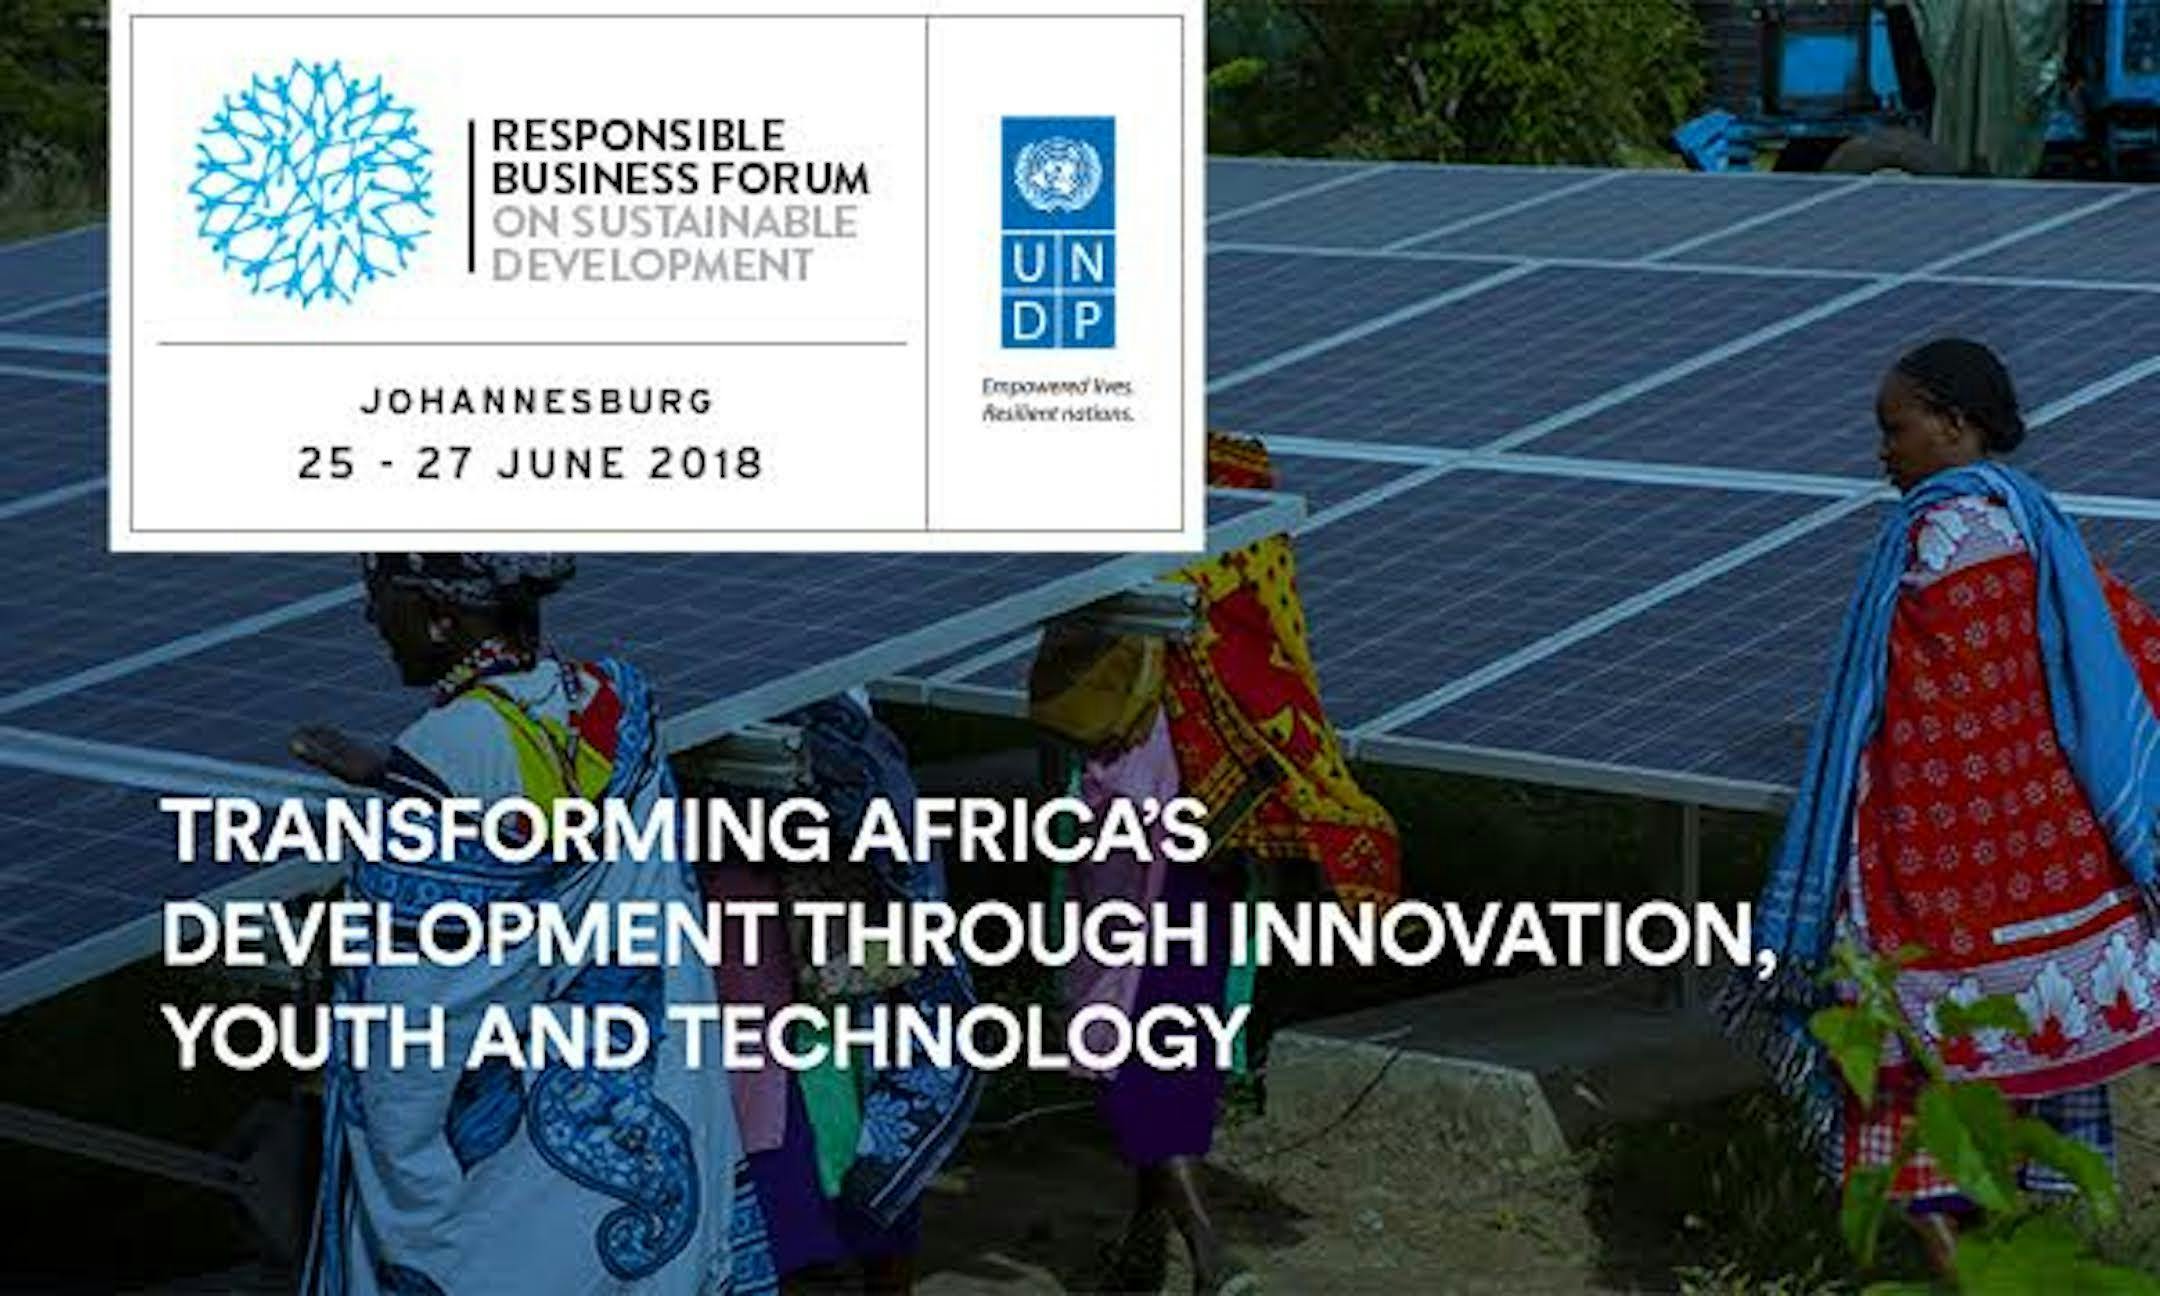 Responsible Business Forum on Sustainable Development, Africa 2018